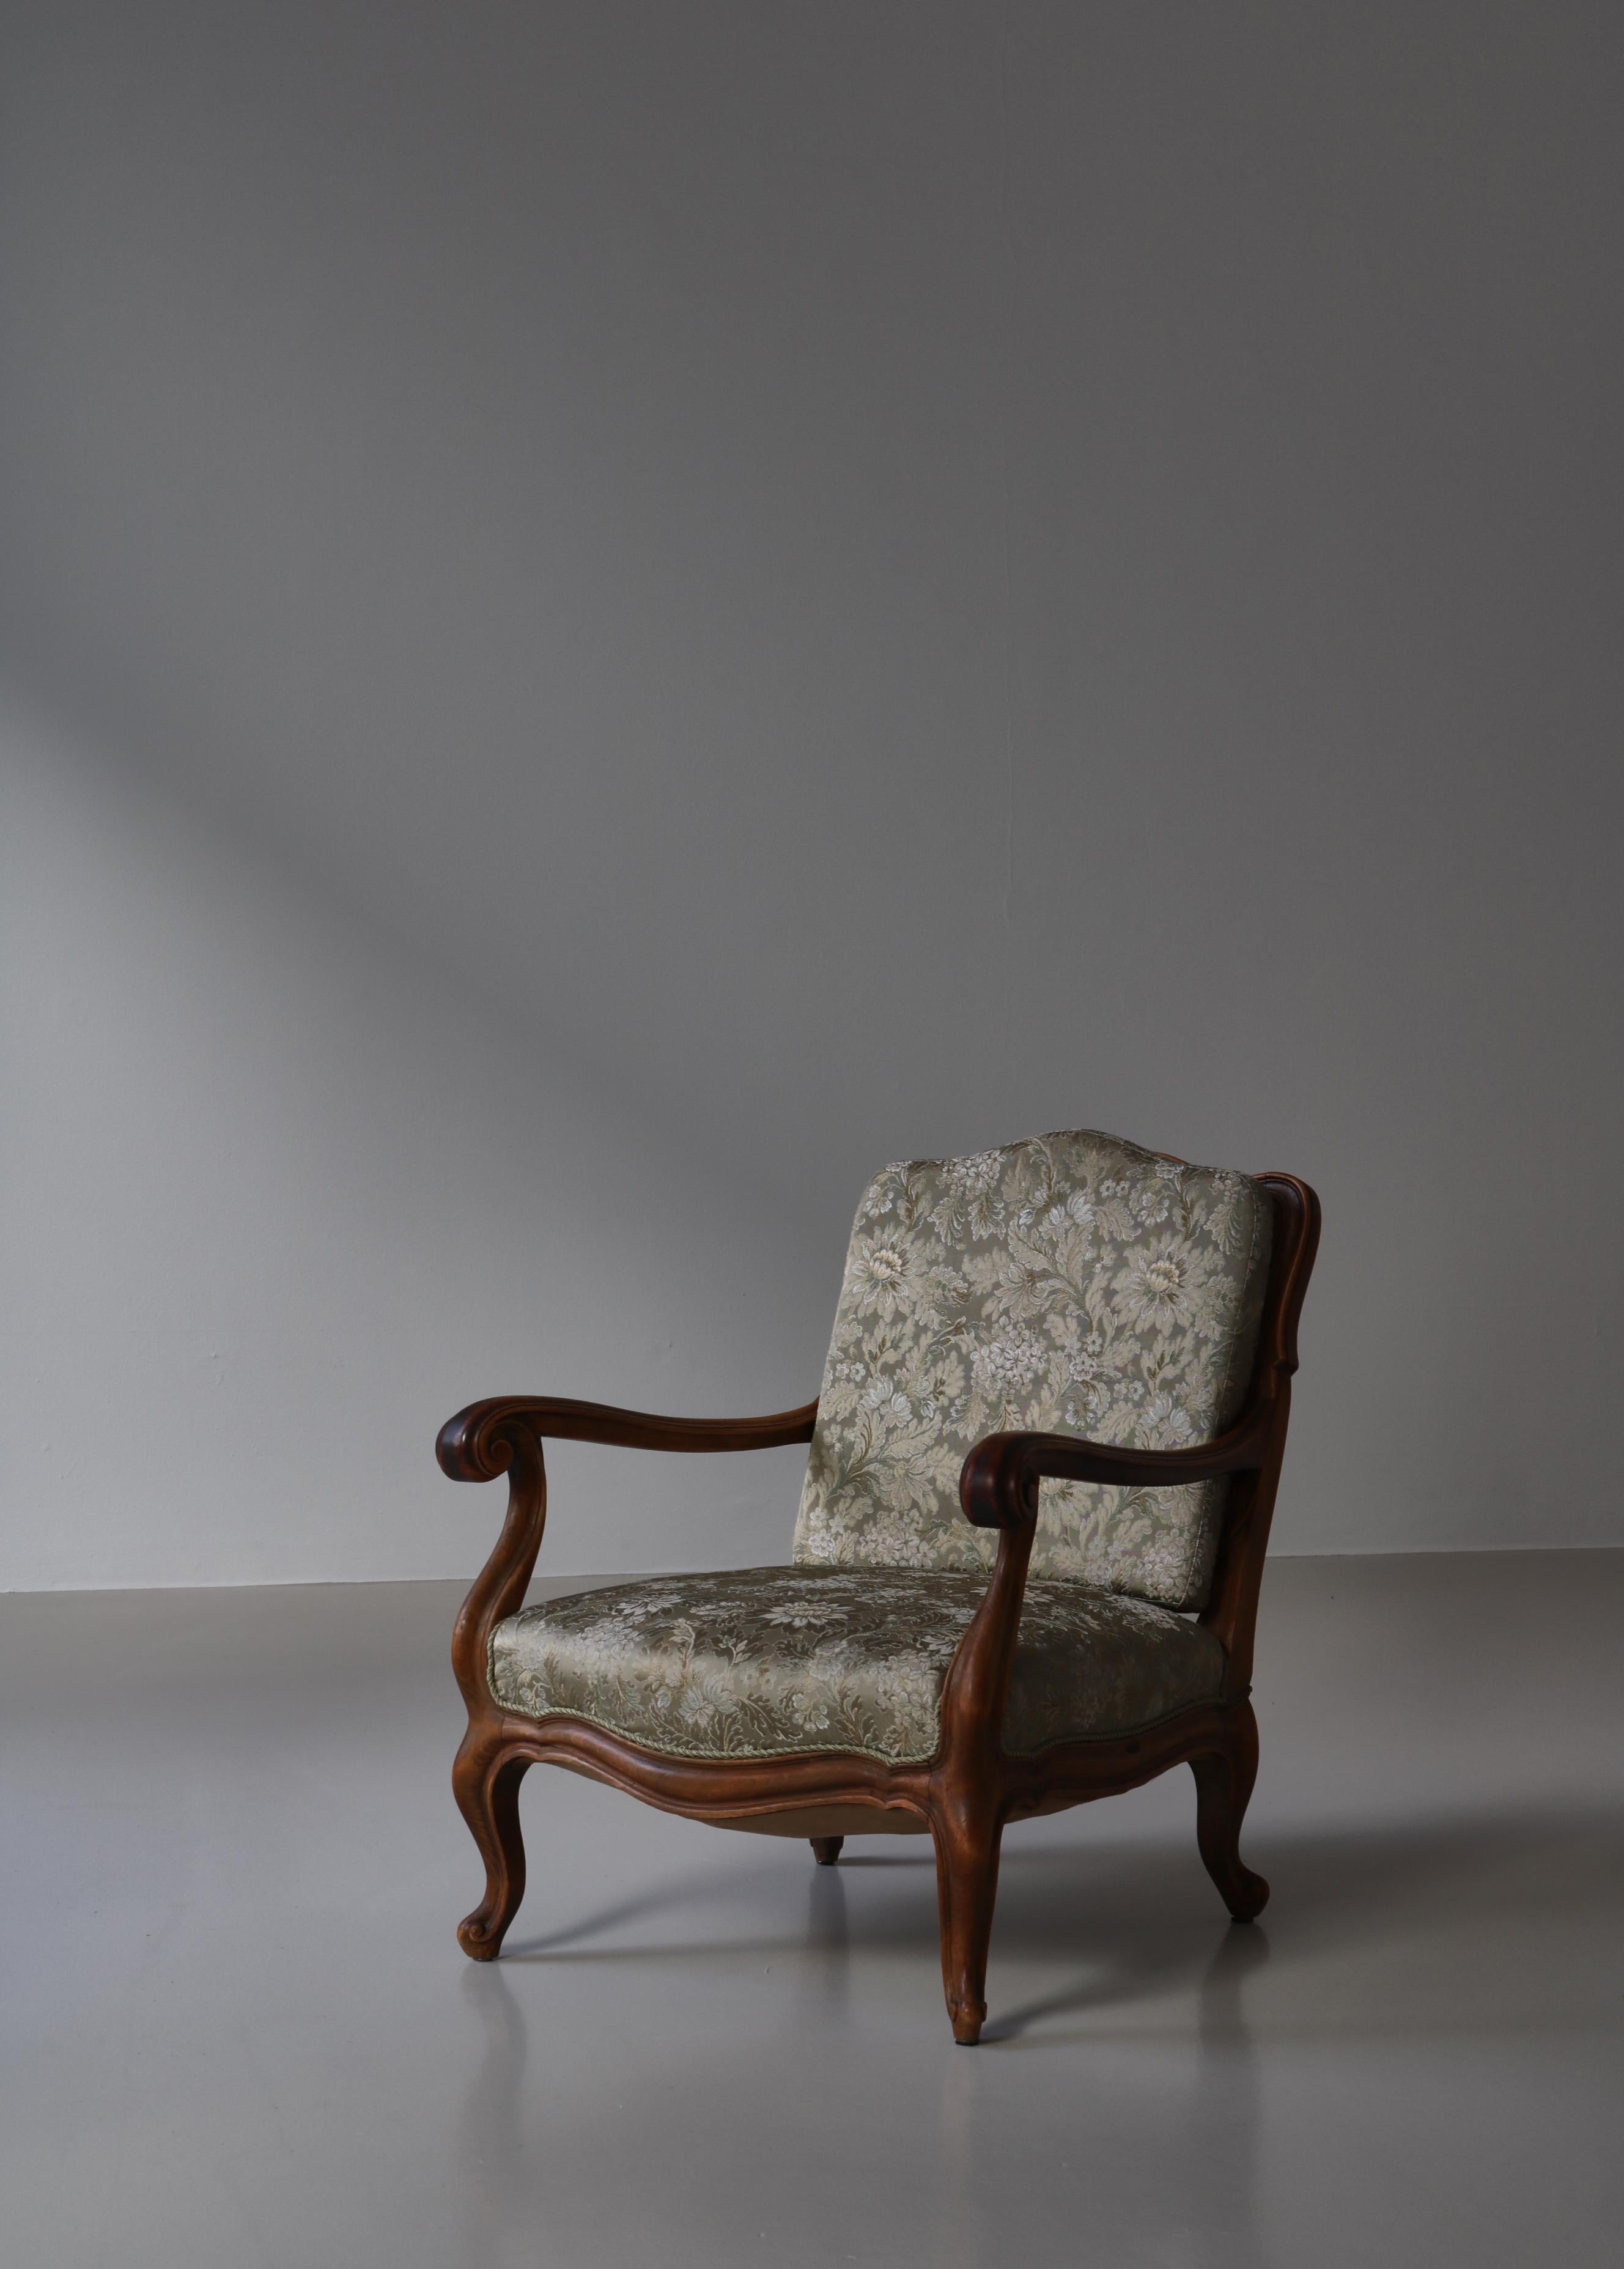 Bergére Chair Rococo Revival by Danish Cabinetmaker, Early 20th Century For Sale 13